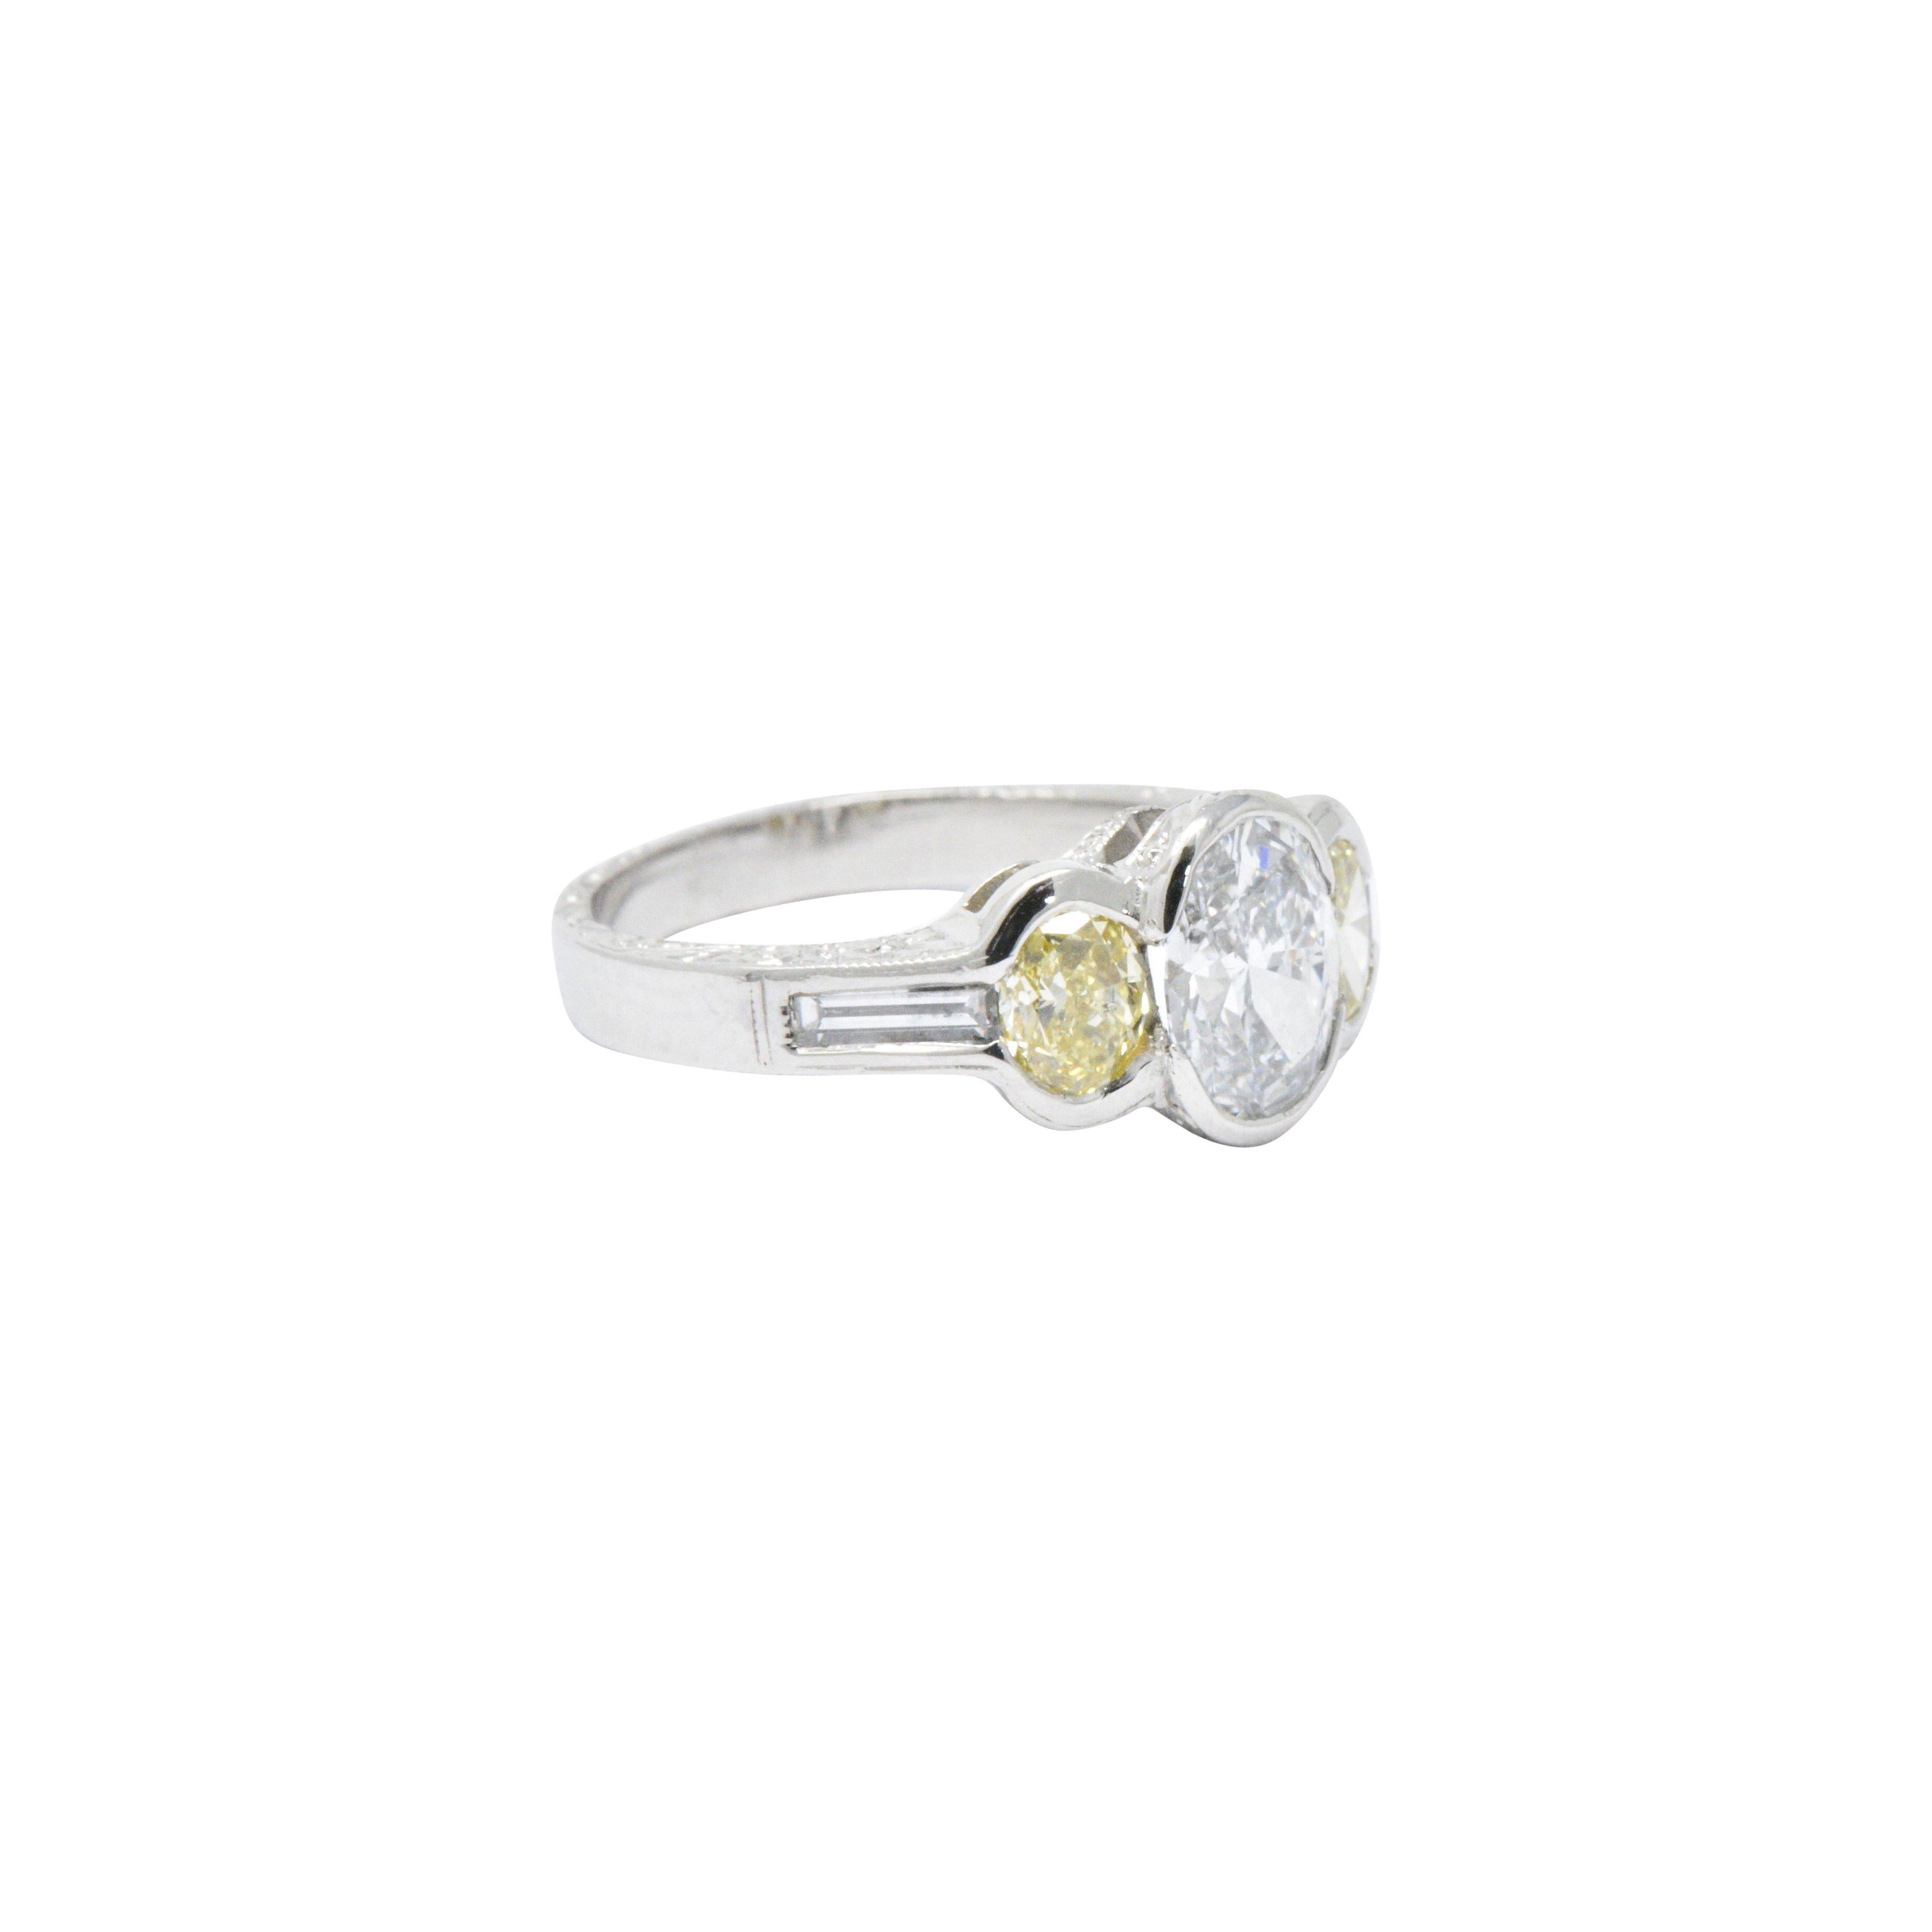 Centering a brilliant oval cut diamond weighing 1.02 carats, E color, VS2 clarity and accompanied by GIA Diamond Grading Report, in a classy partial bezel setting

Flanked by two fancy yellow oval brilliant cut diamonds weighing 0.76 carats total,